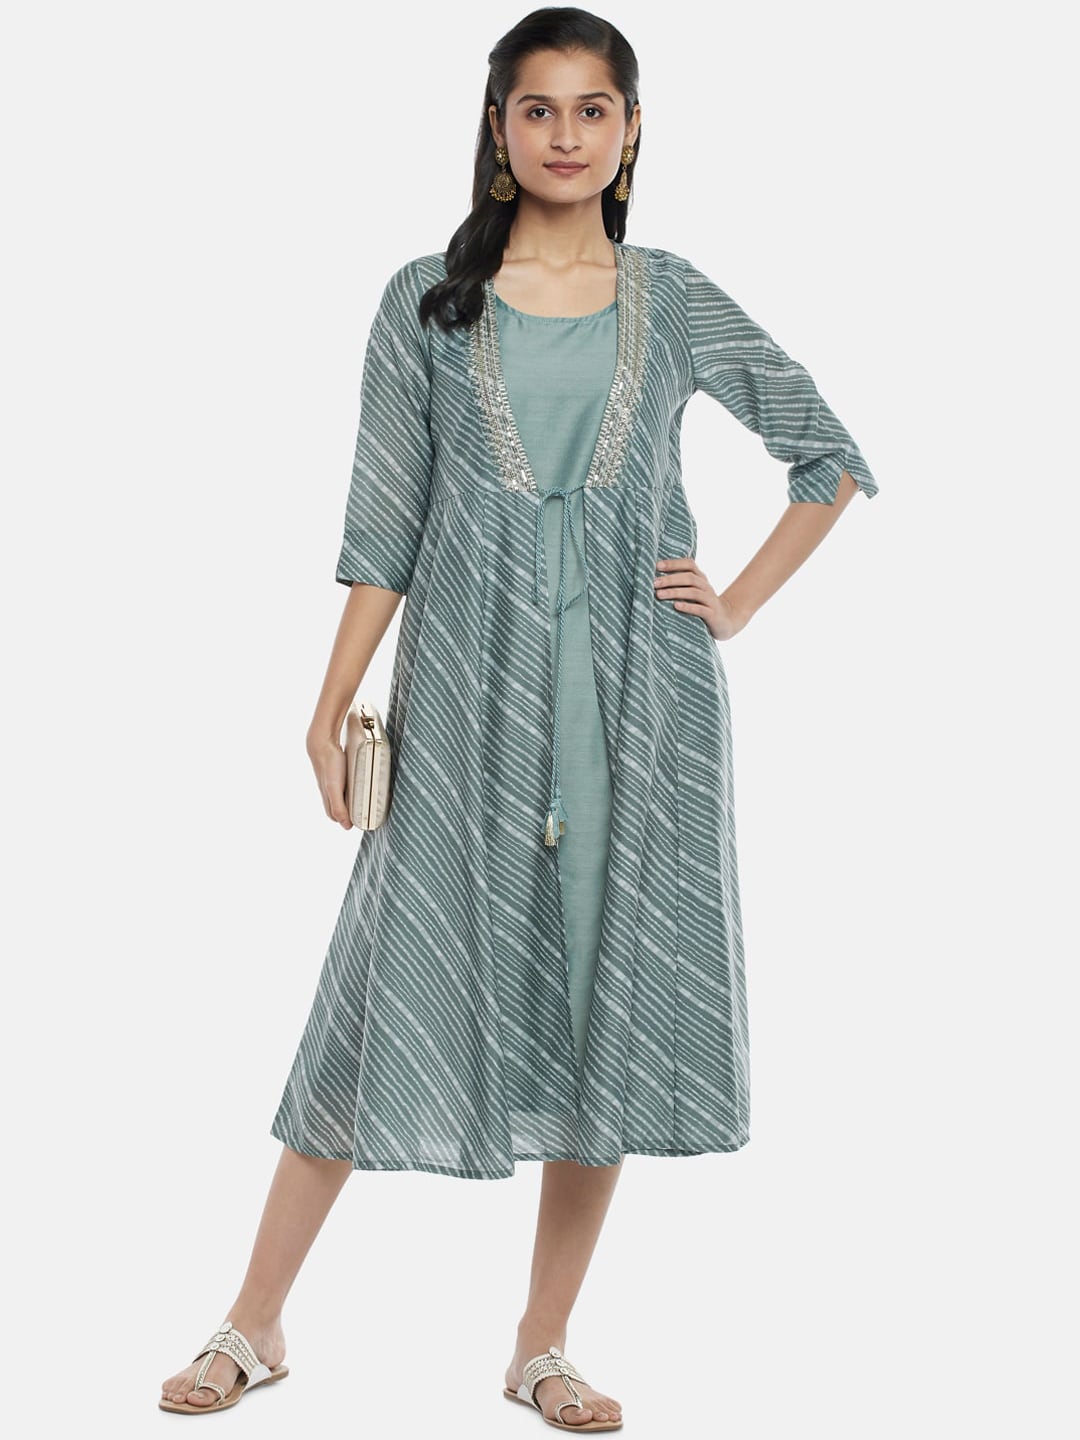 RANGMANCH BY PANTALOONS Green Striped Layered Ethnic A-Line Midi Dress Price in India